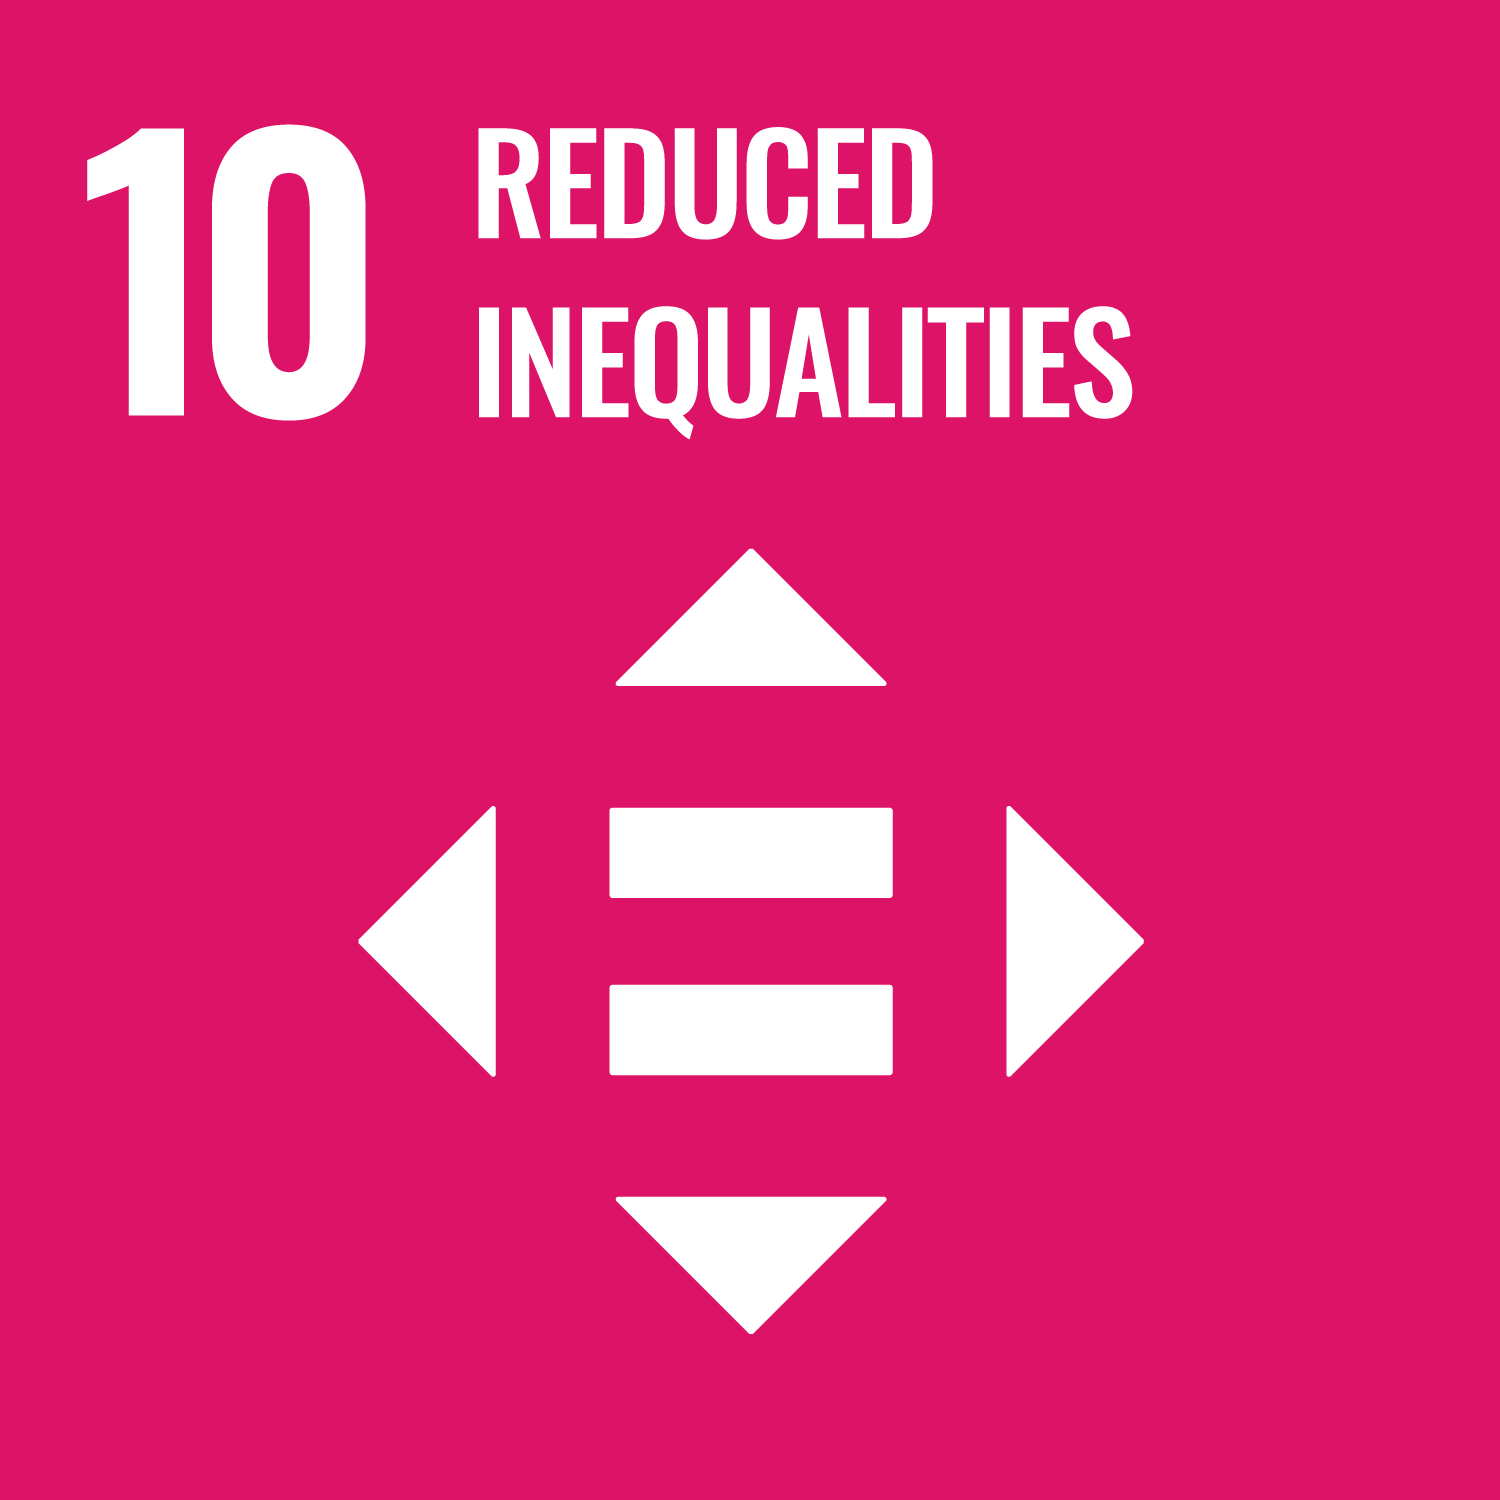 SDG Goal icon for Good Health and Well-being.